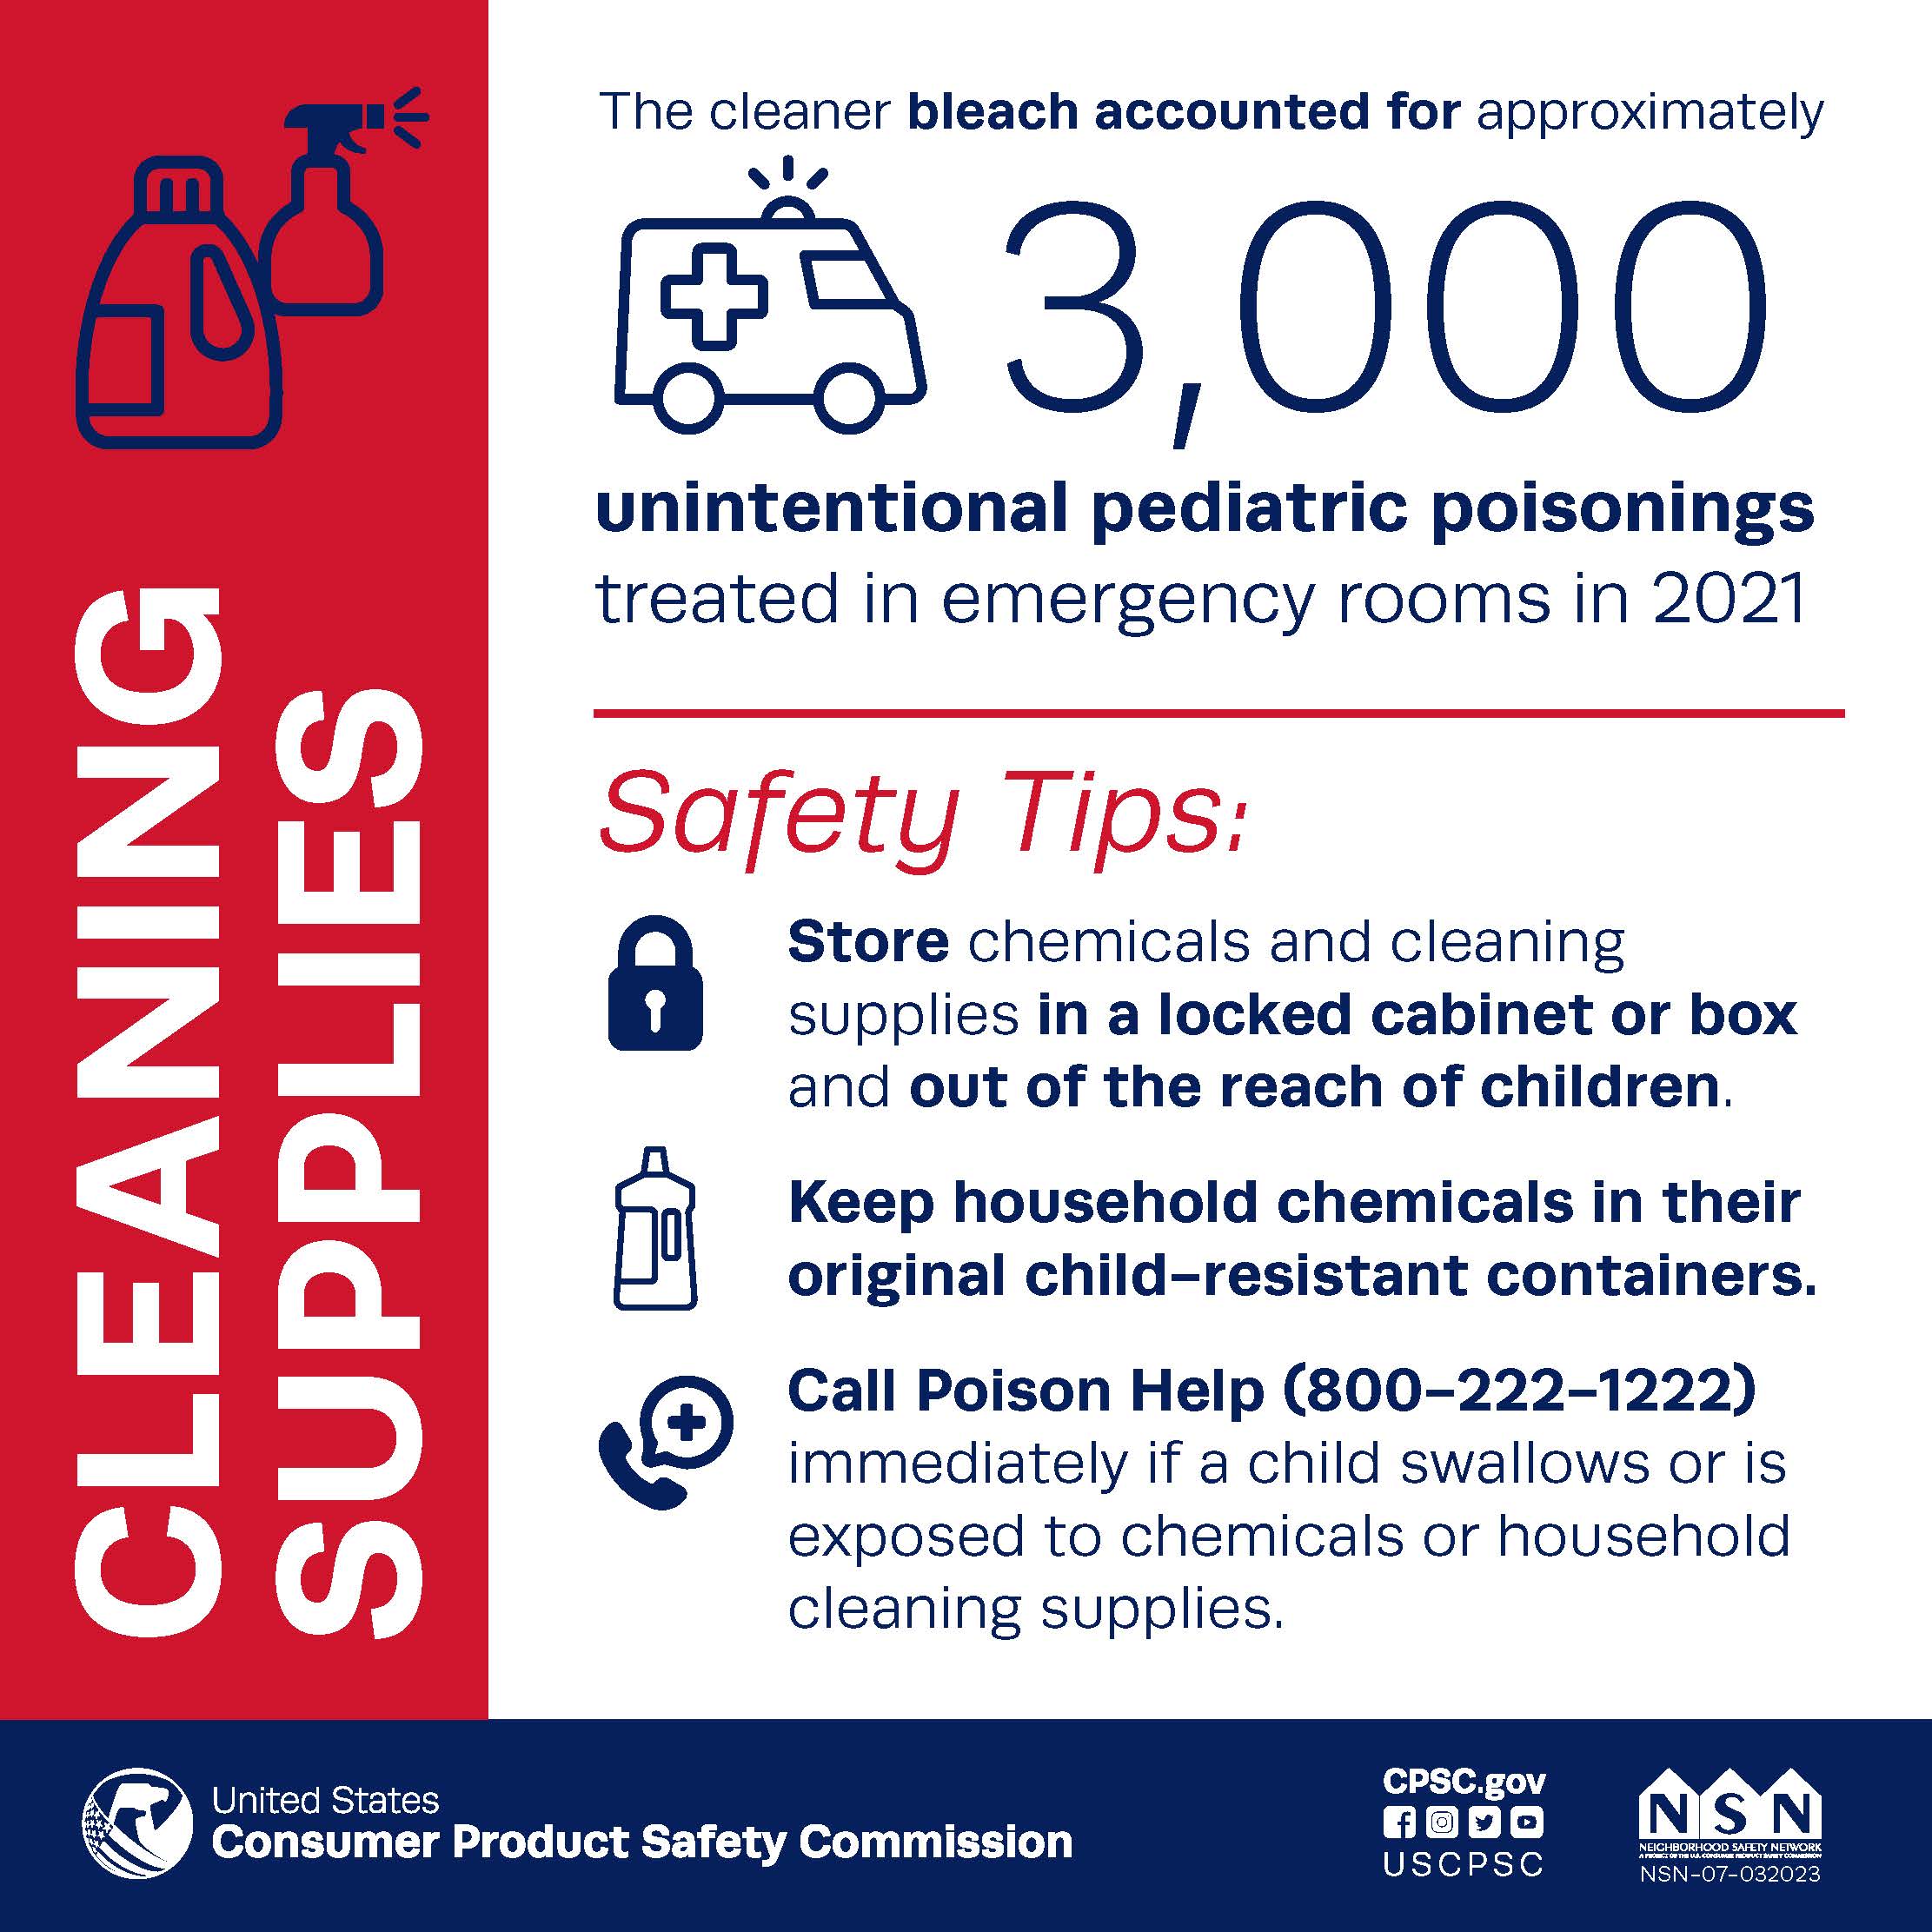 Cleaning supplies safety tips